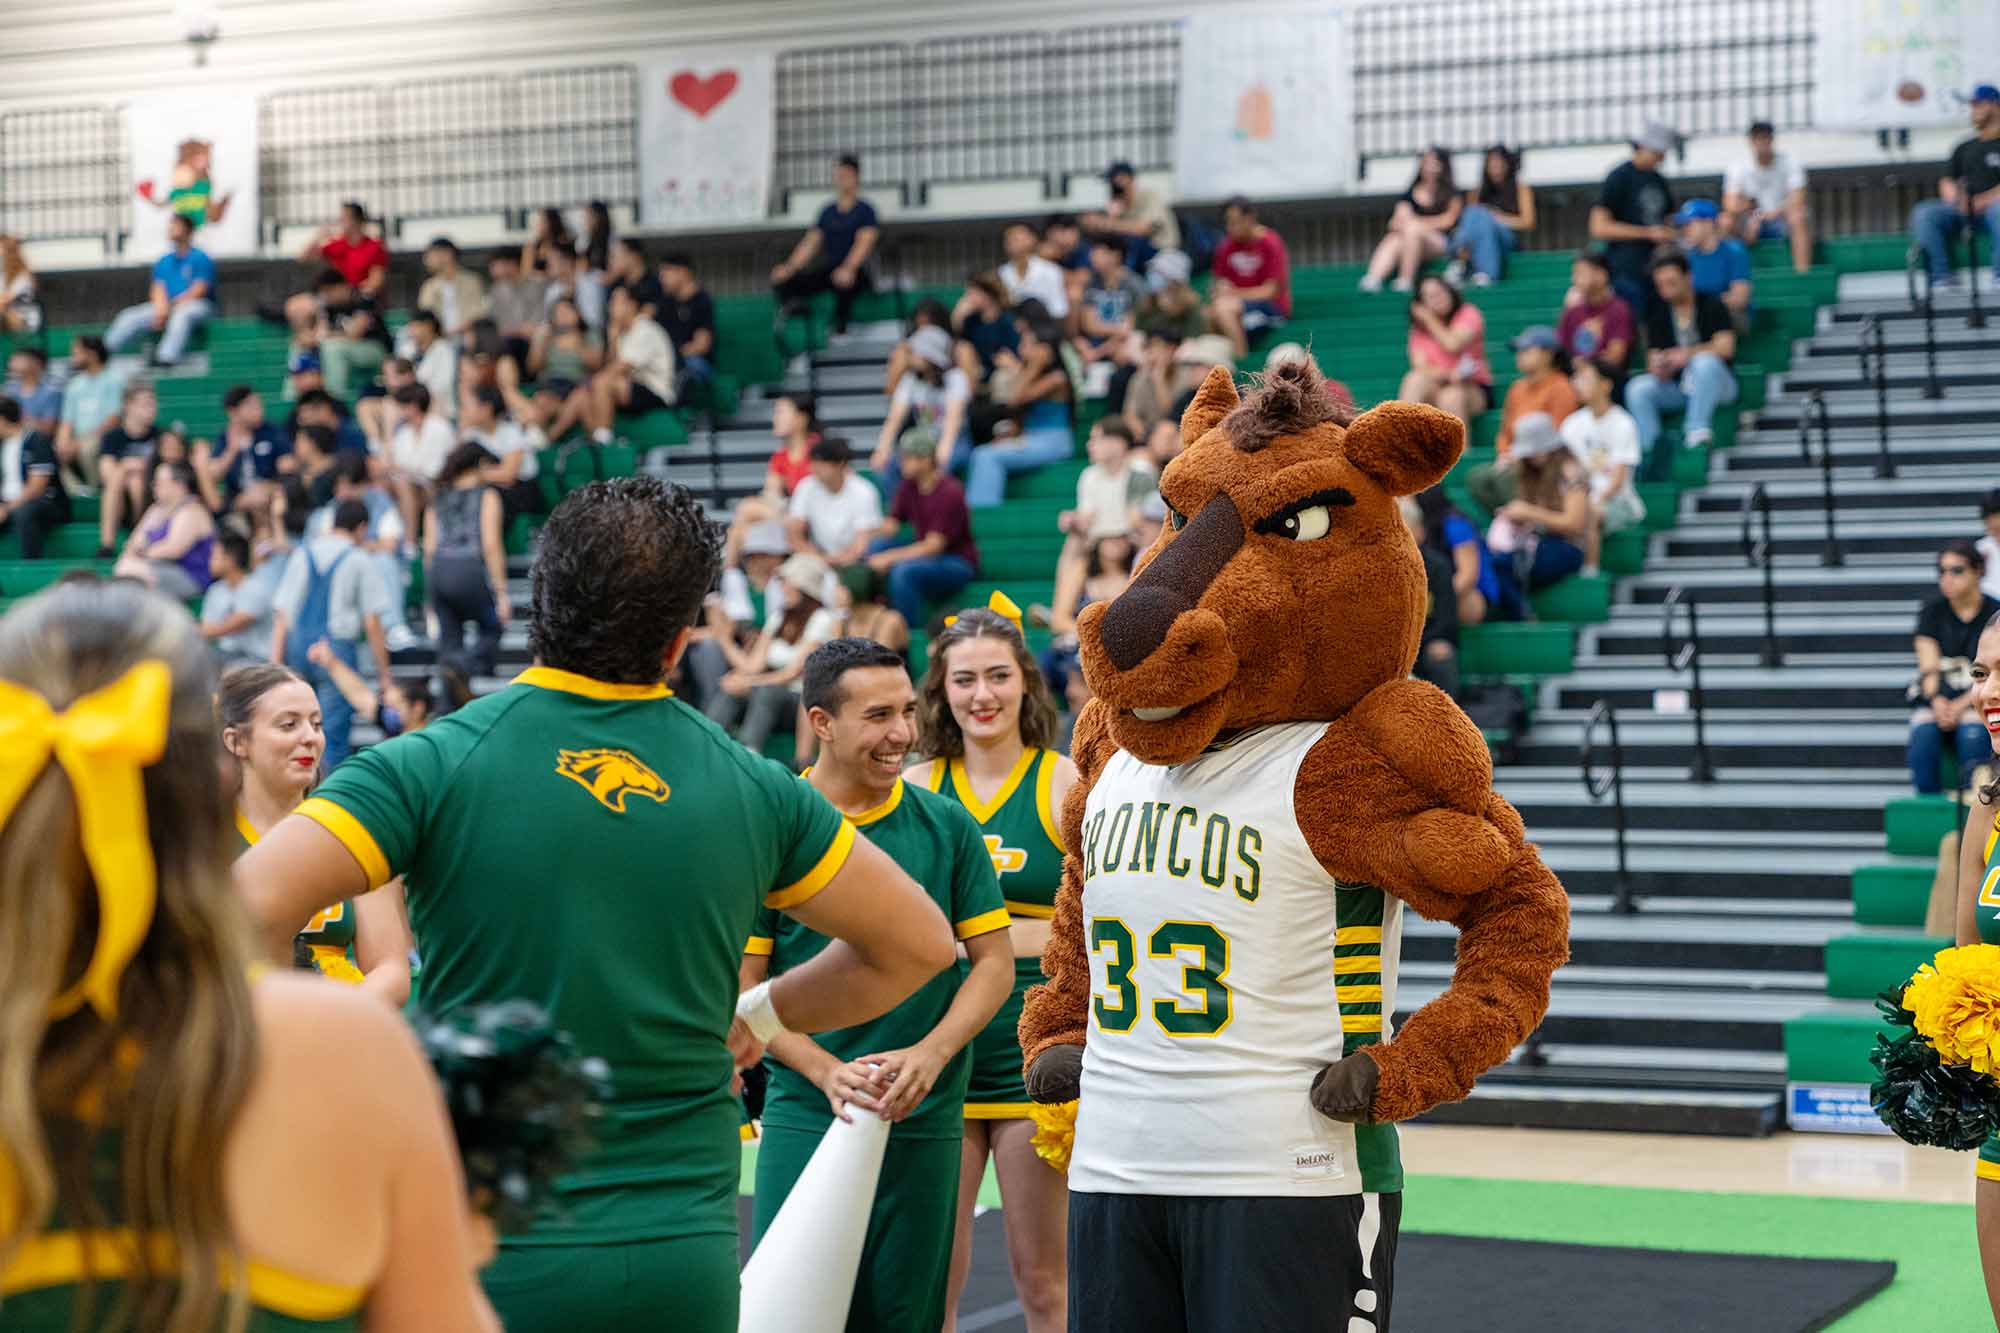 Horse mascot and cheer leaders at a gym